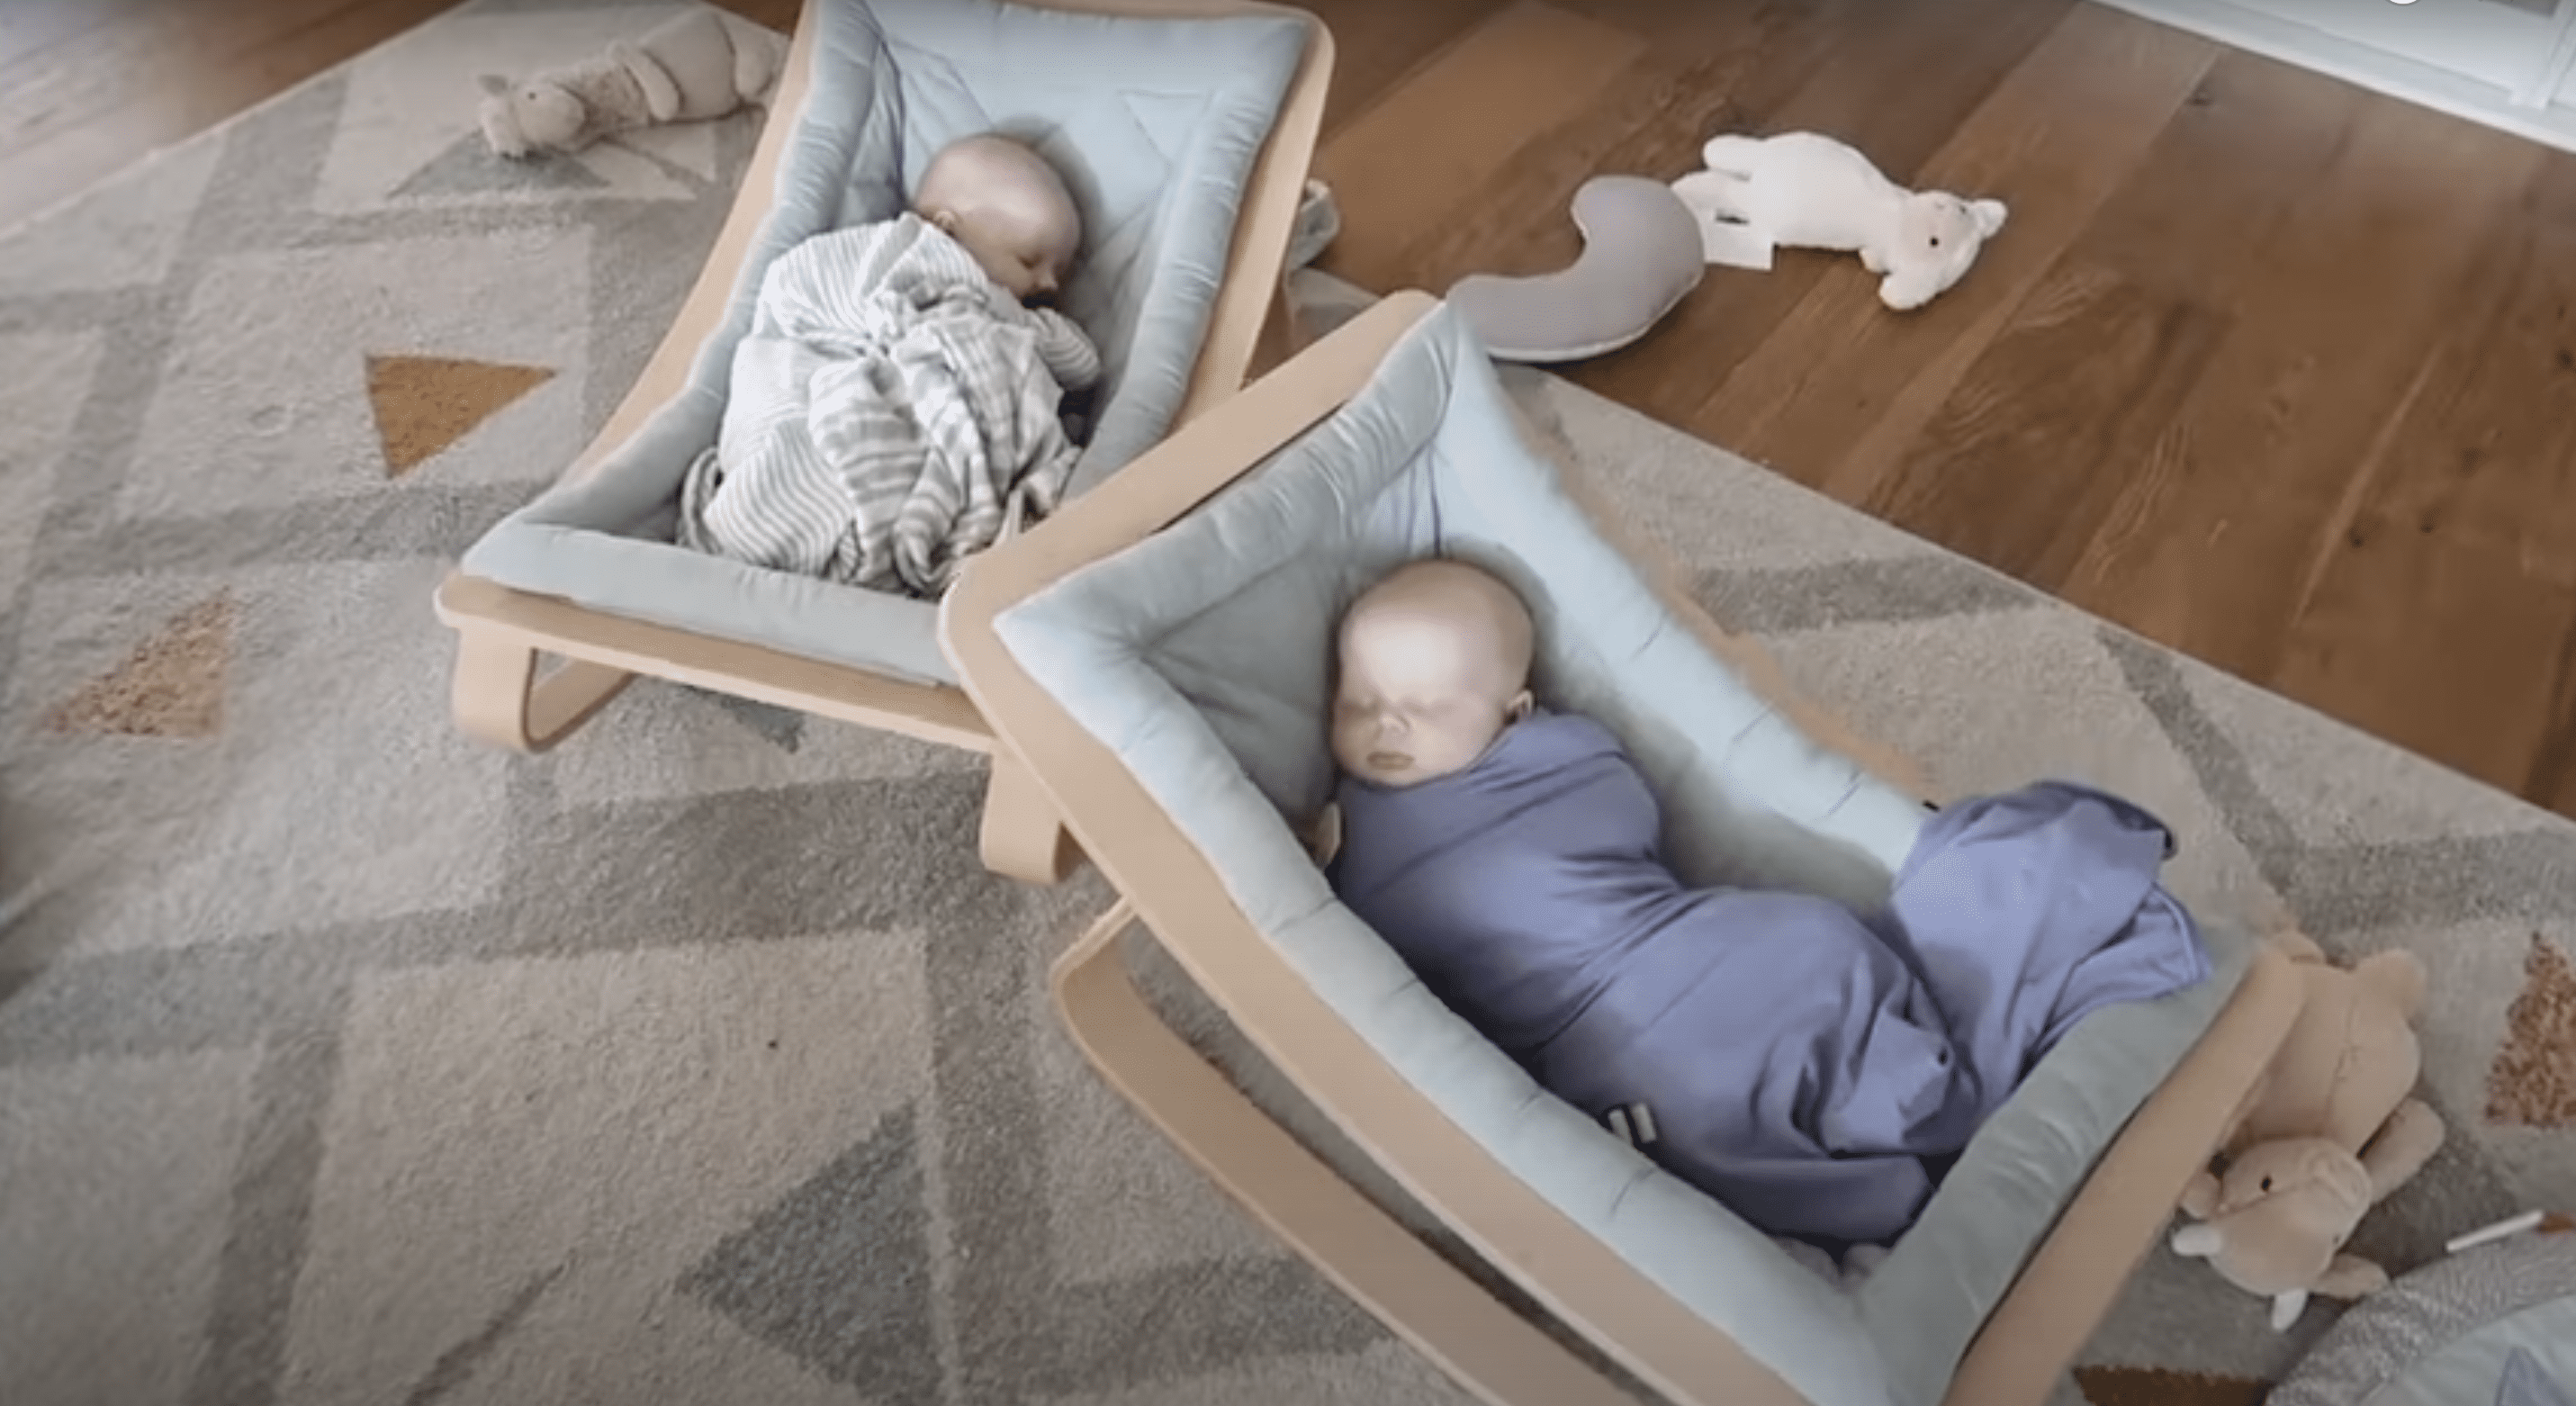 Baby Sylvie and baby Cosmo photographed taking a nap in their deckchairs.  |  Source: YouTube.com/Life with Beans